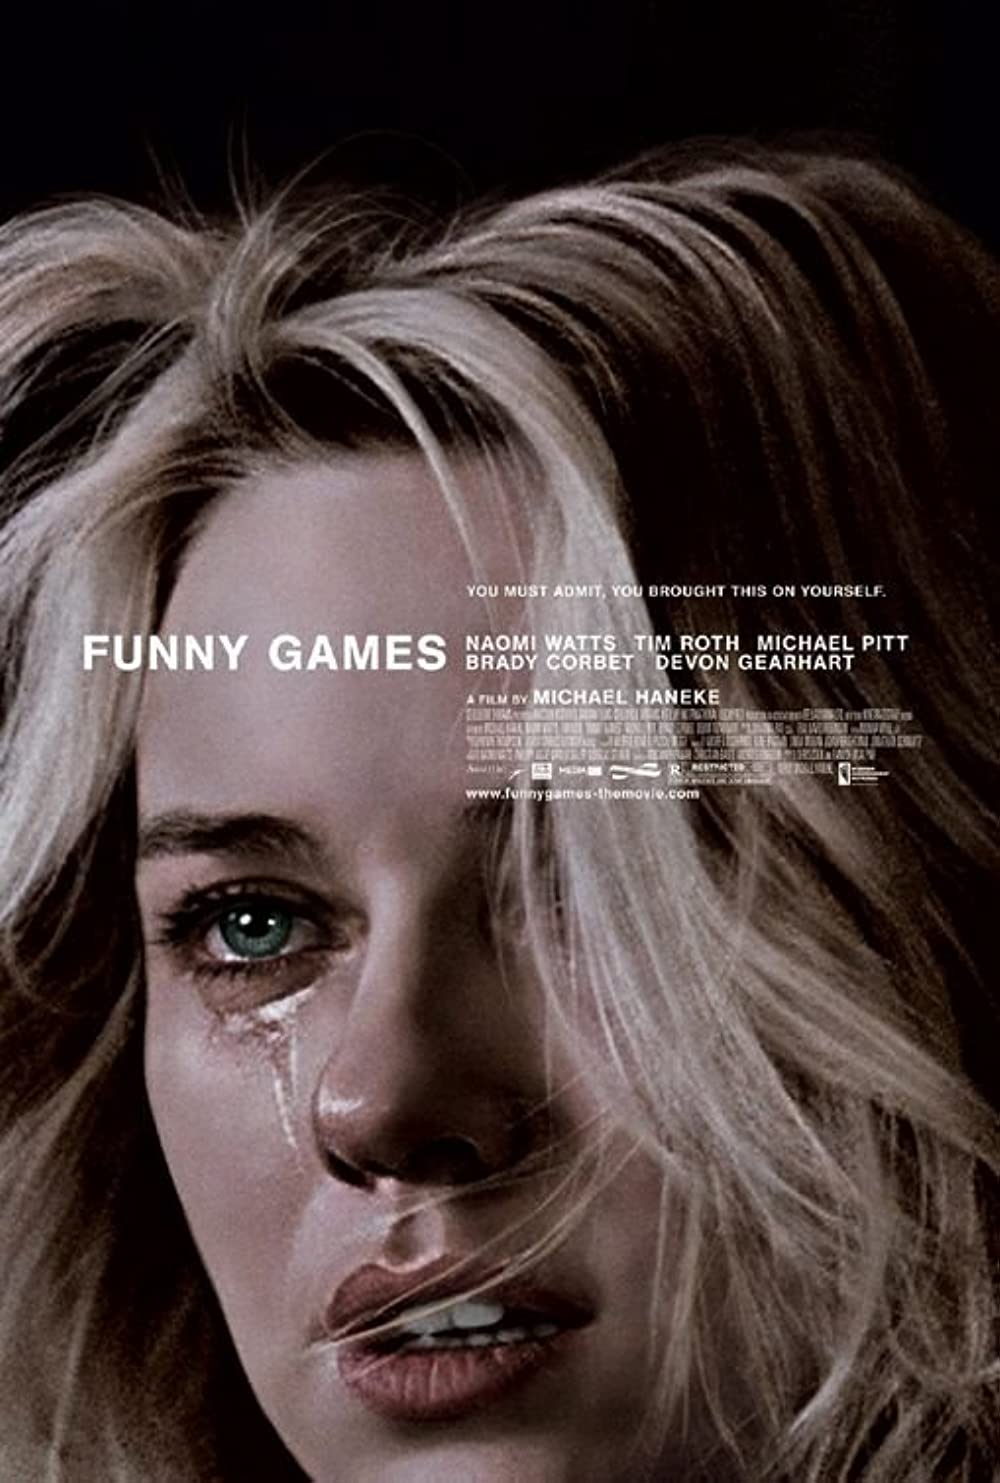 Funny Games (2007) Best Home Invasion Movies For Chilly Nights